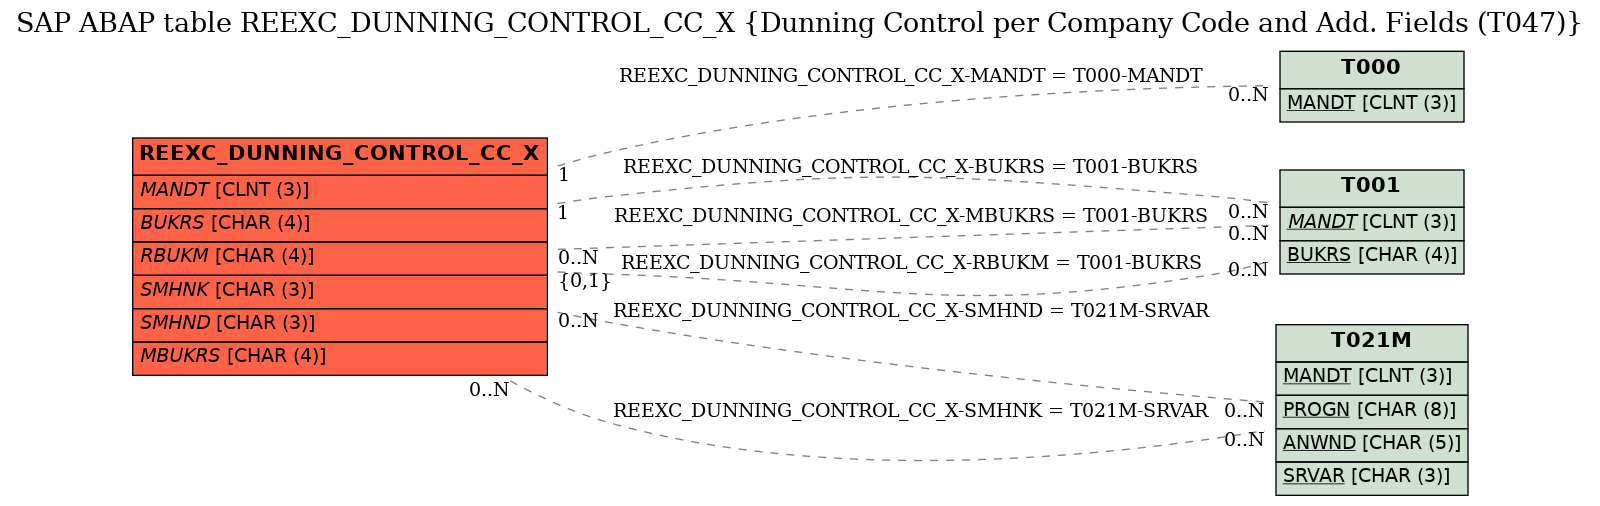 E-R Diagram for table REEXC_DUNNING_CONTROL_CC_X (Dunning Control per Company Code and Add. Fields (T047))